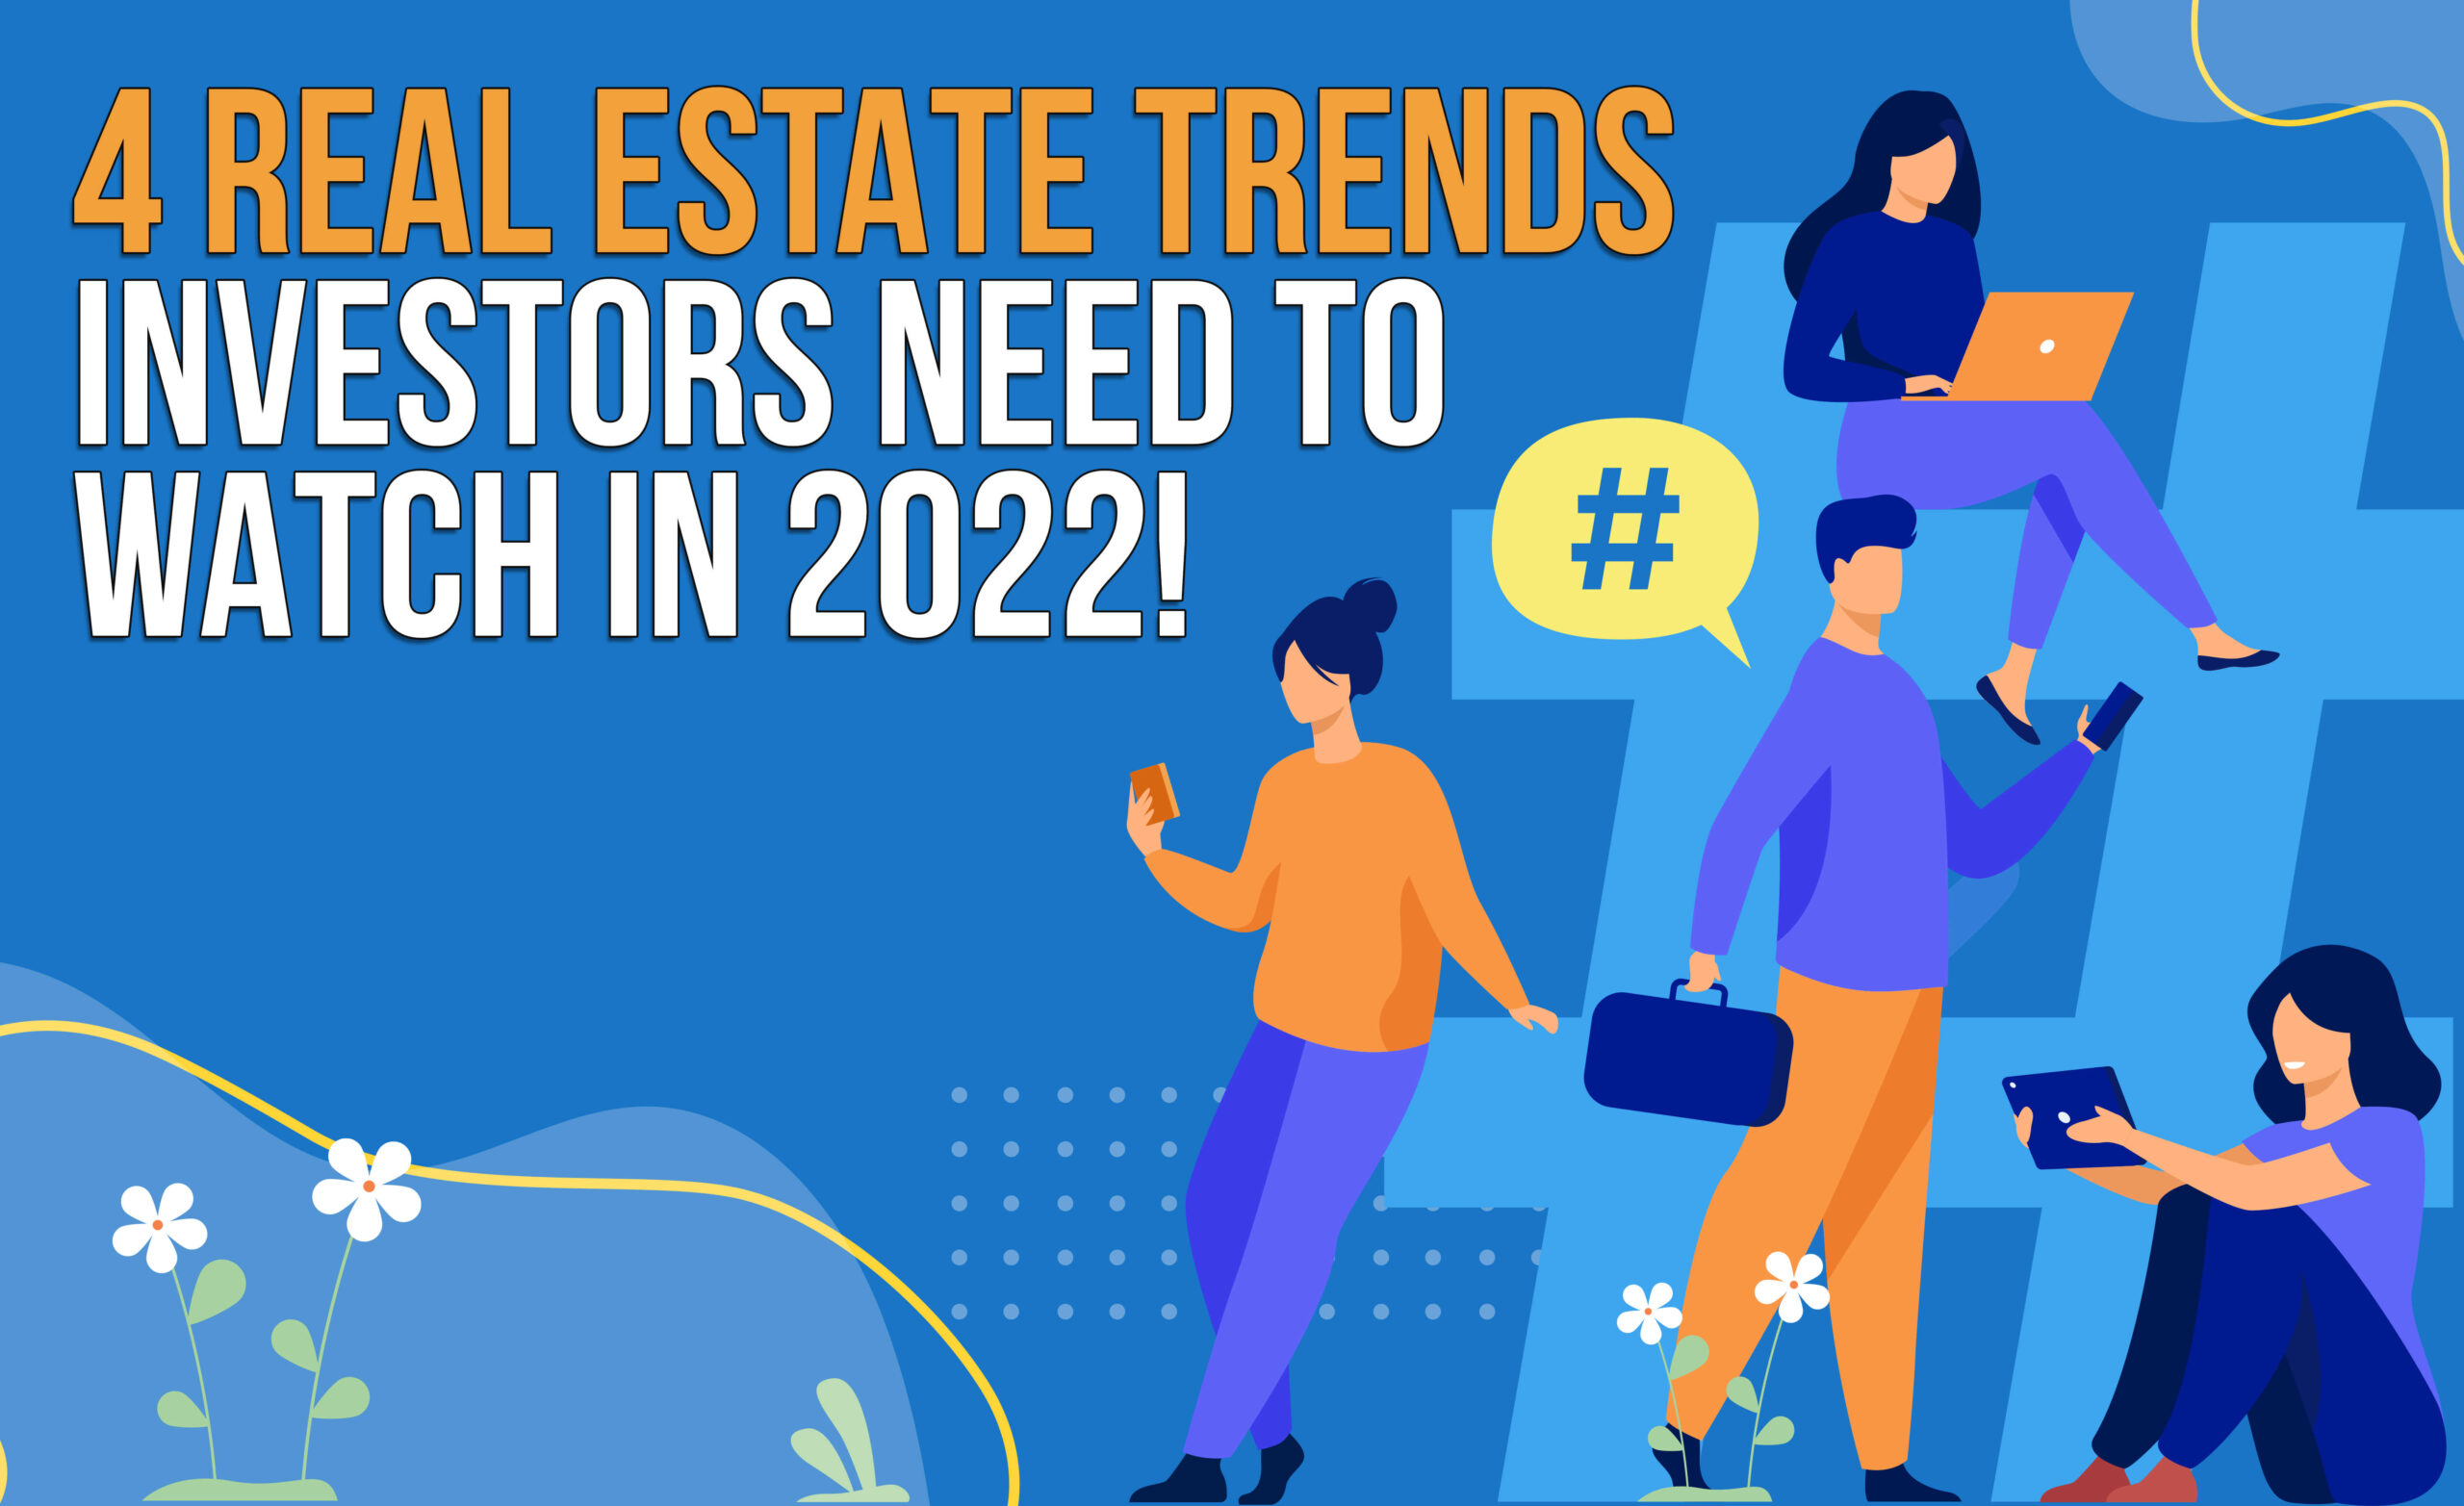 4 Real Estate Trends Investors Need to Watch in 2022